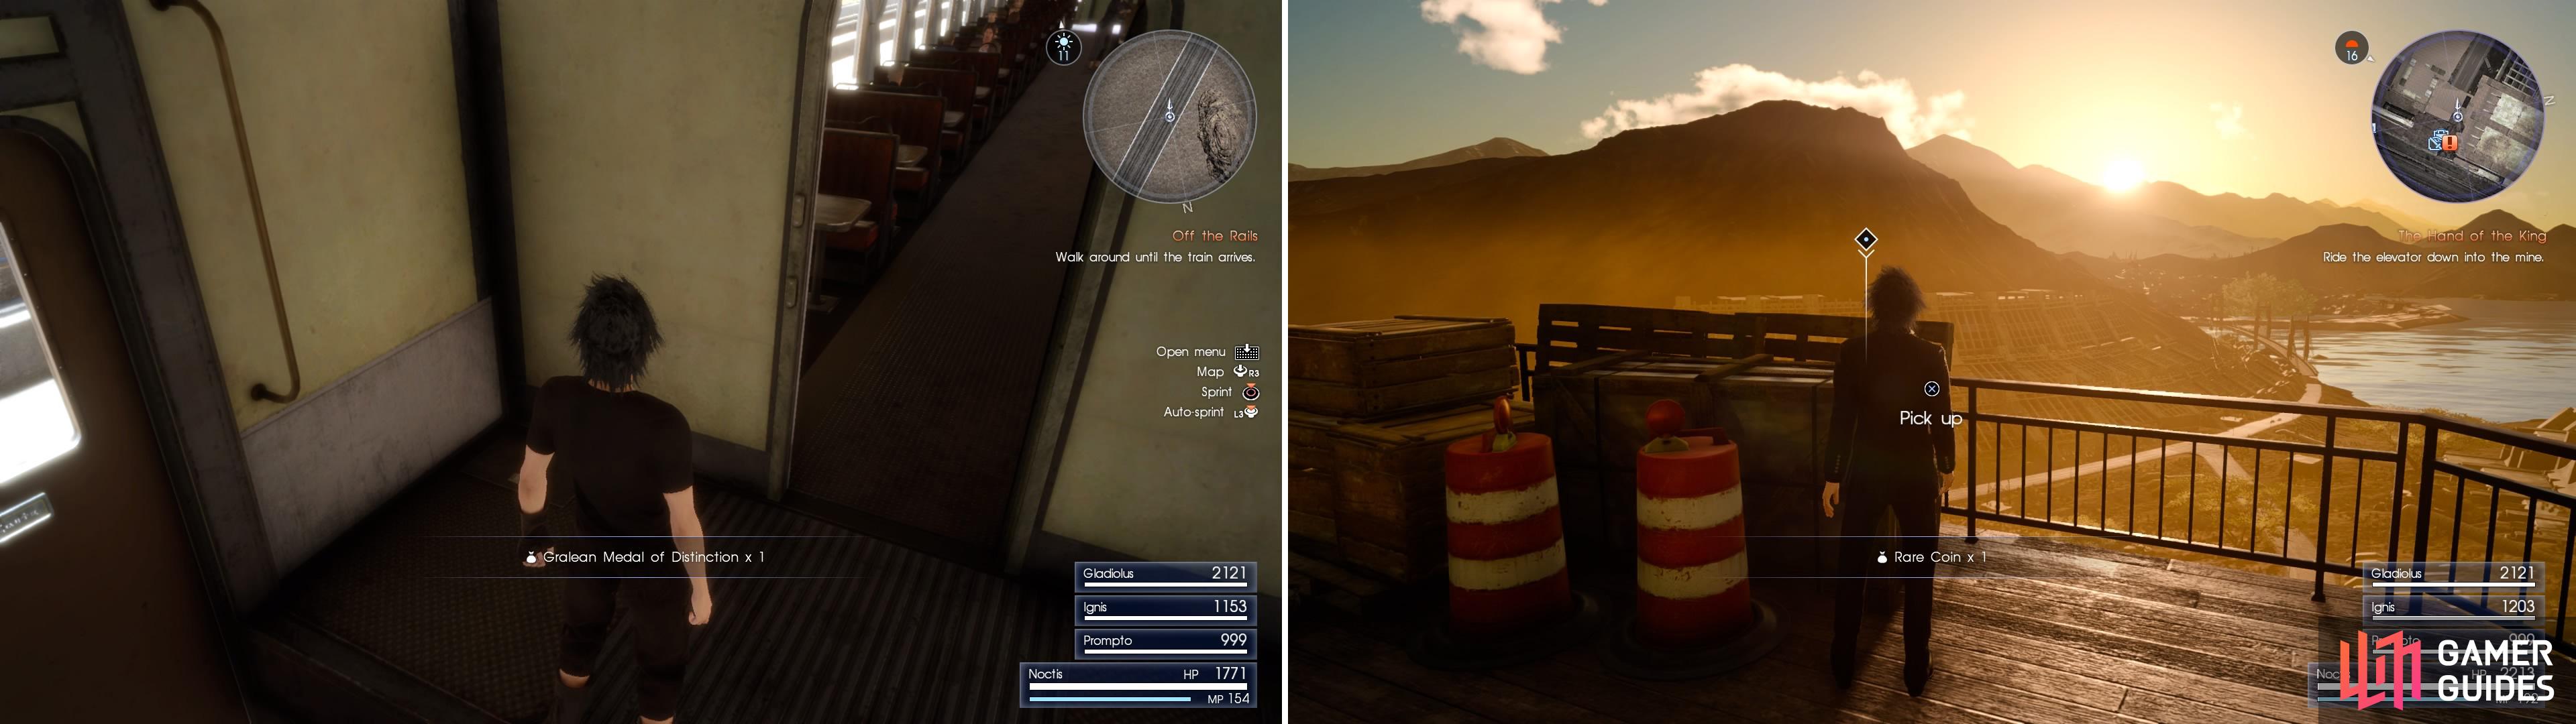 Look around the train car for items (left) and also the station when you arrive (right).